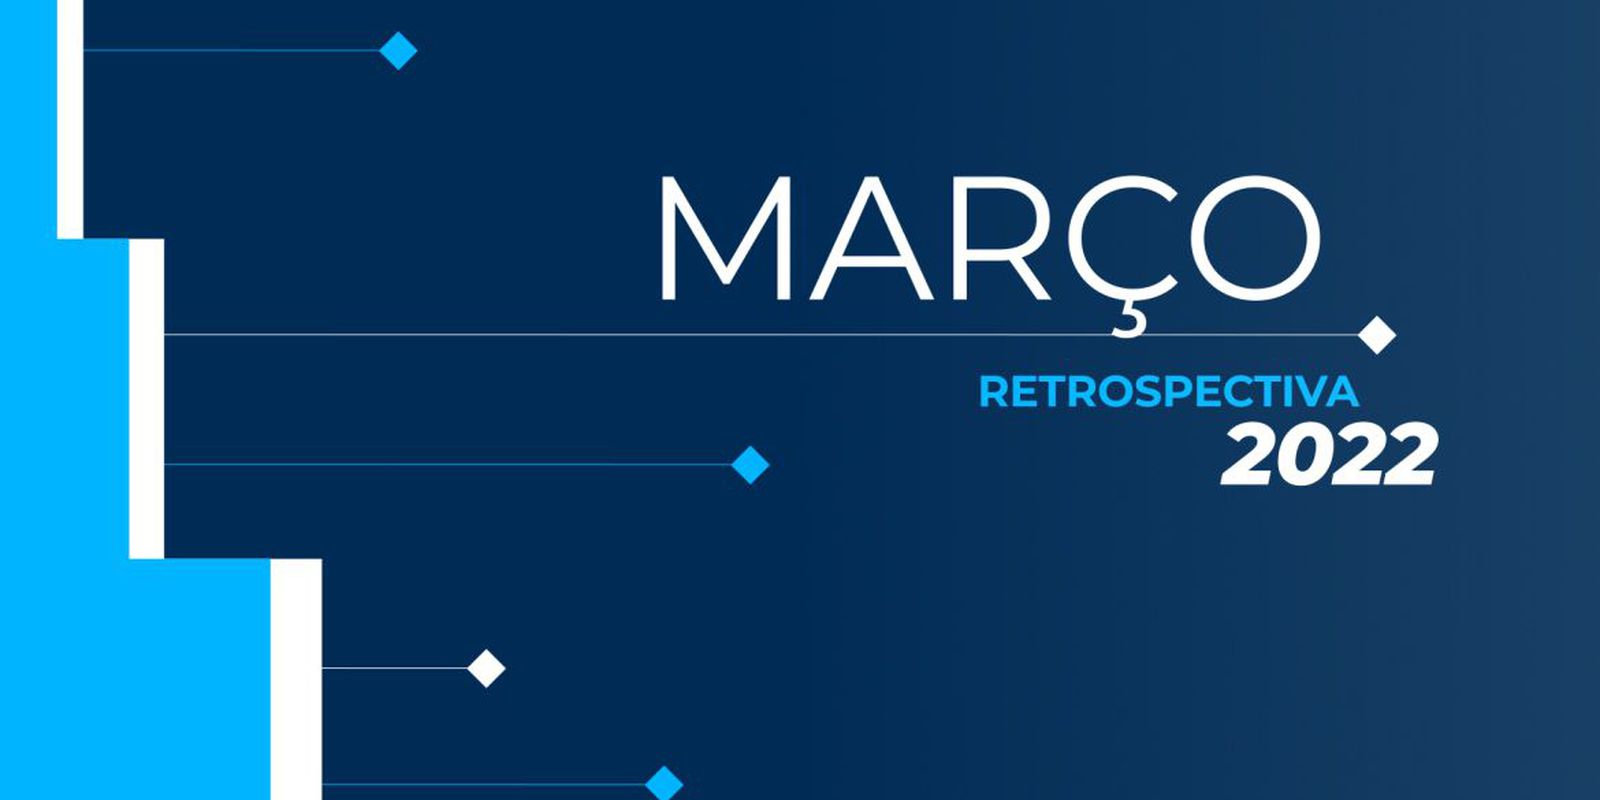 Retrospective 2022: check out the main news of March